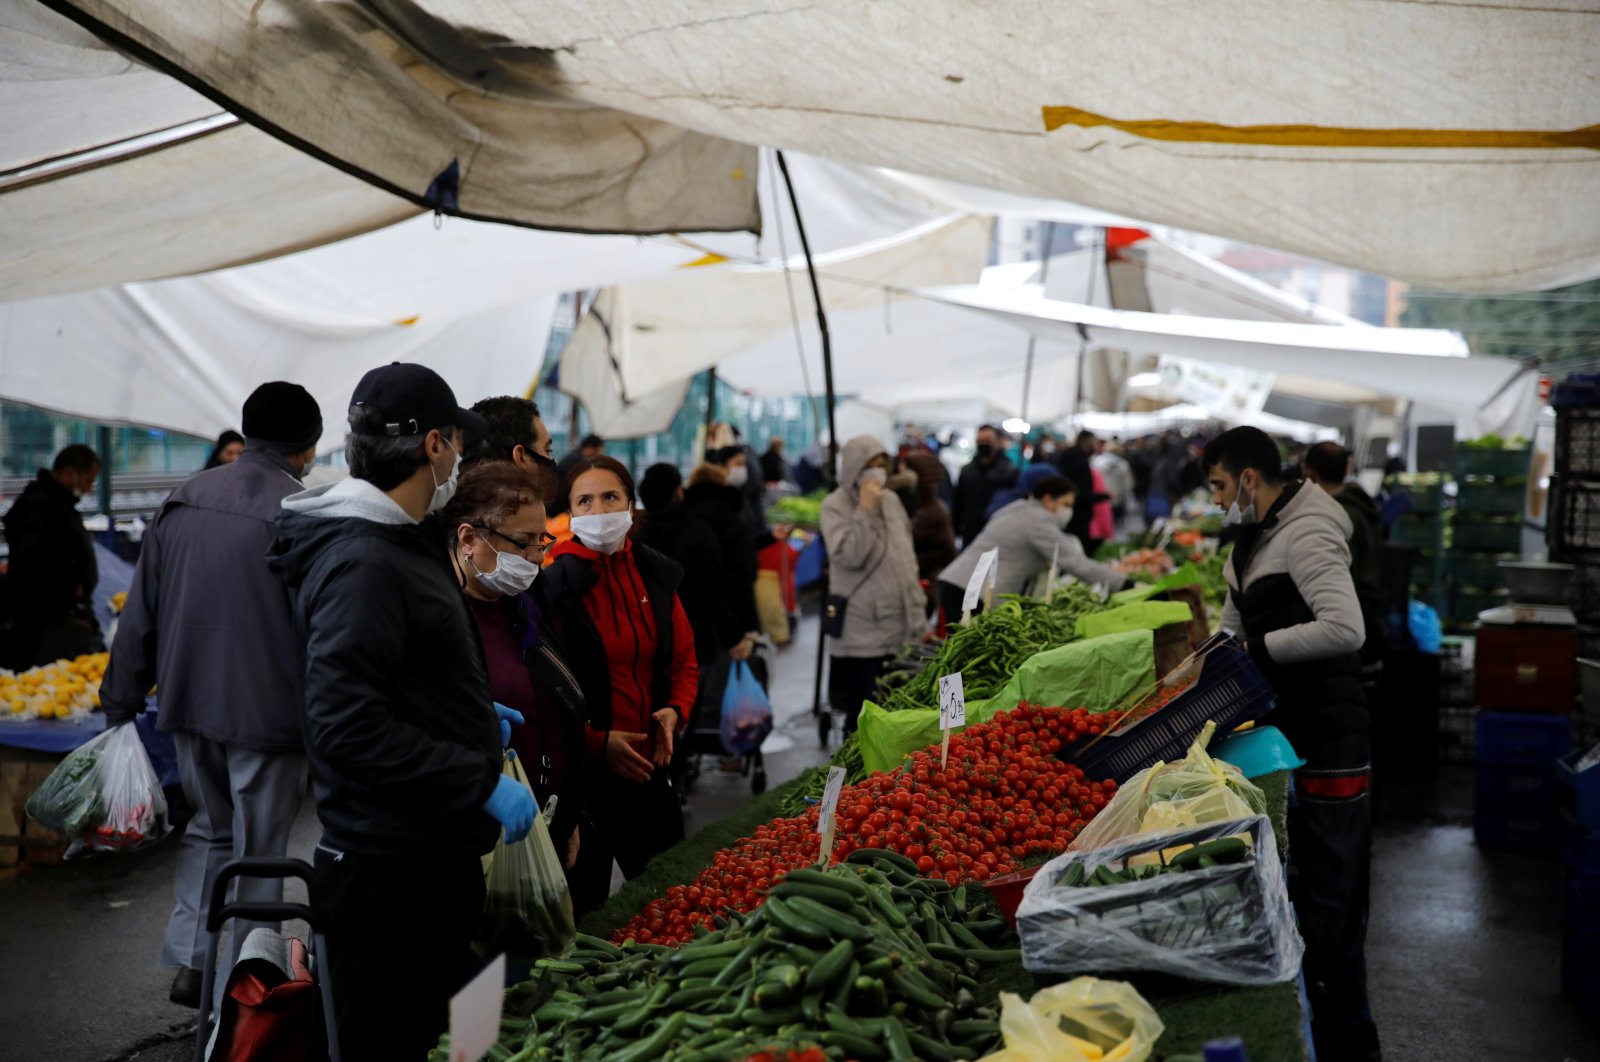 People buy fruit and vegetables in an open market in Istanbul, Turkey, May 4, 2020. (Reuters Photo)